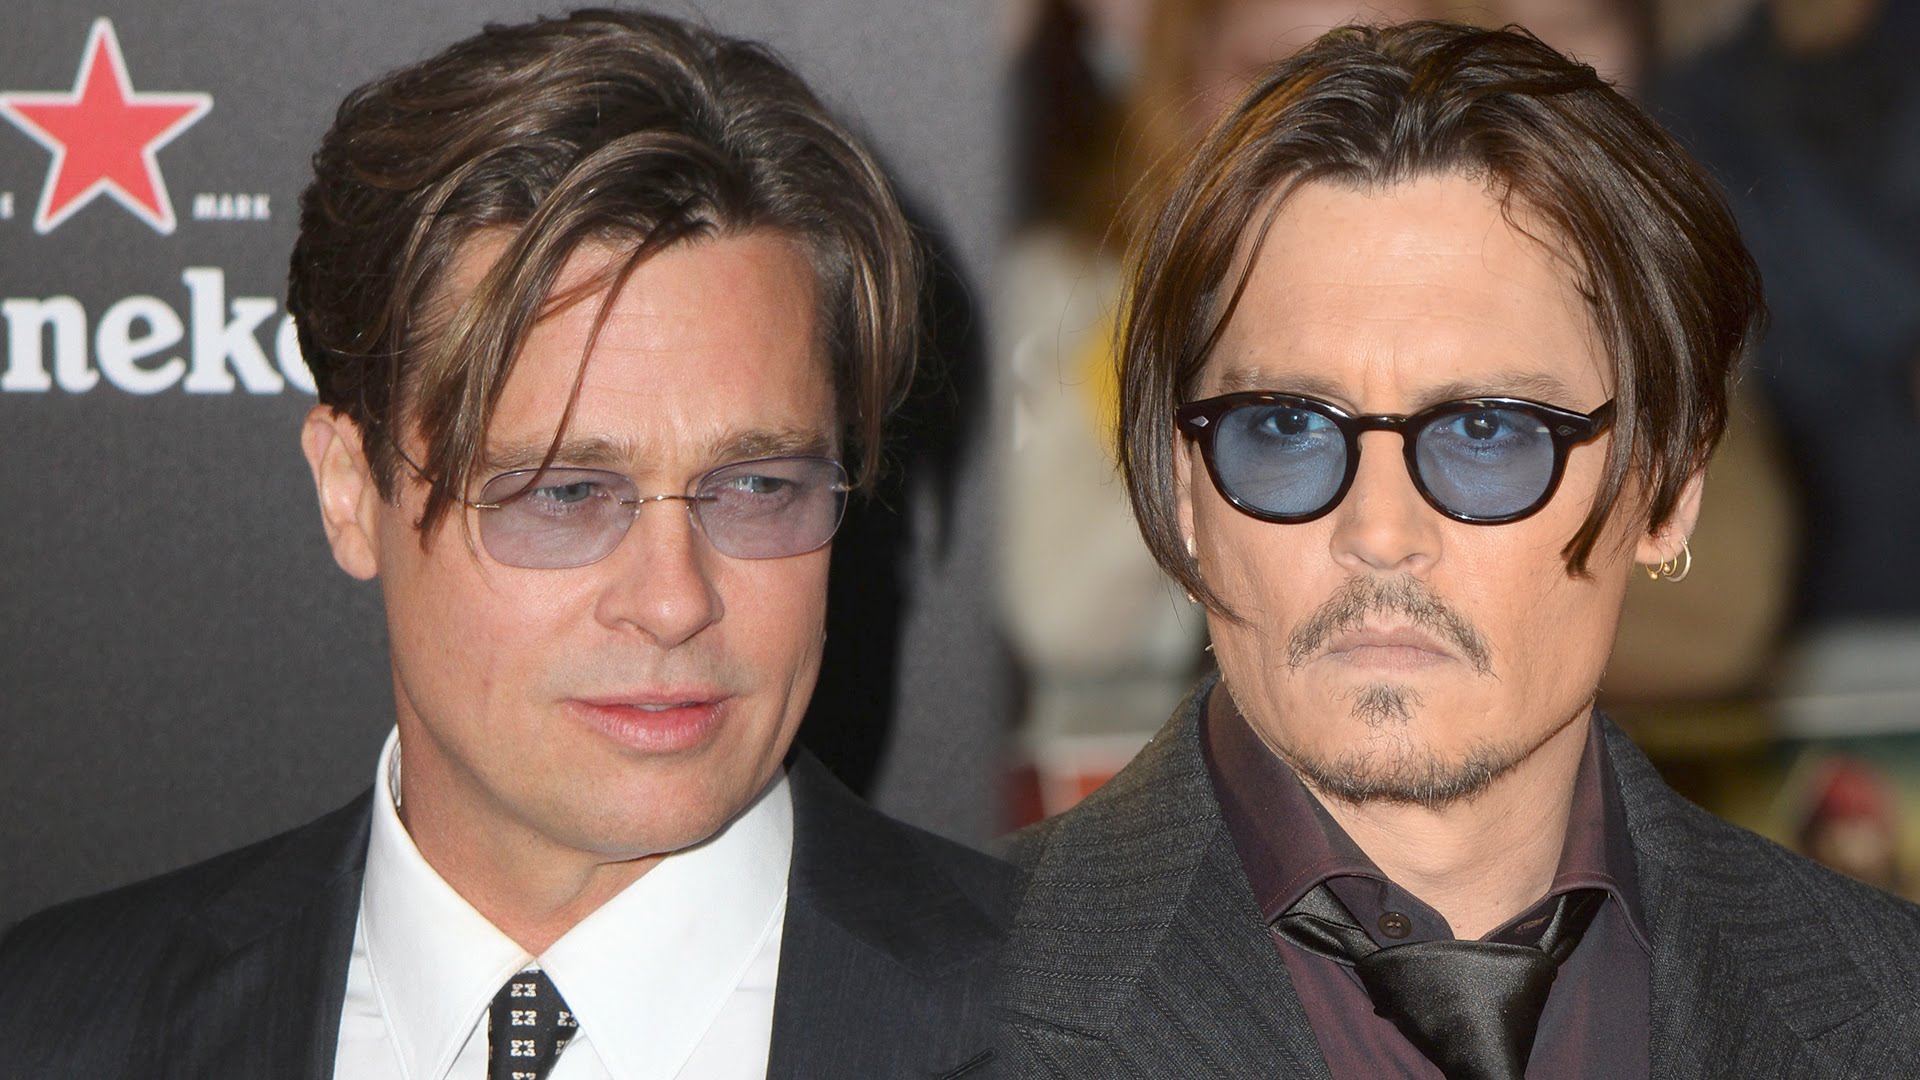 This “Which Actor Must Go” Game Will Reveal the First Letter of Your Soulmate’s Name Brad Pitt VS Johnny Depp